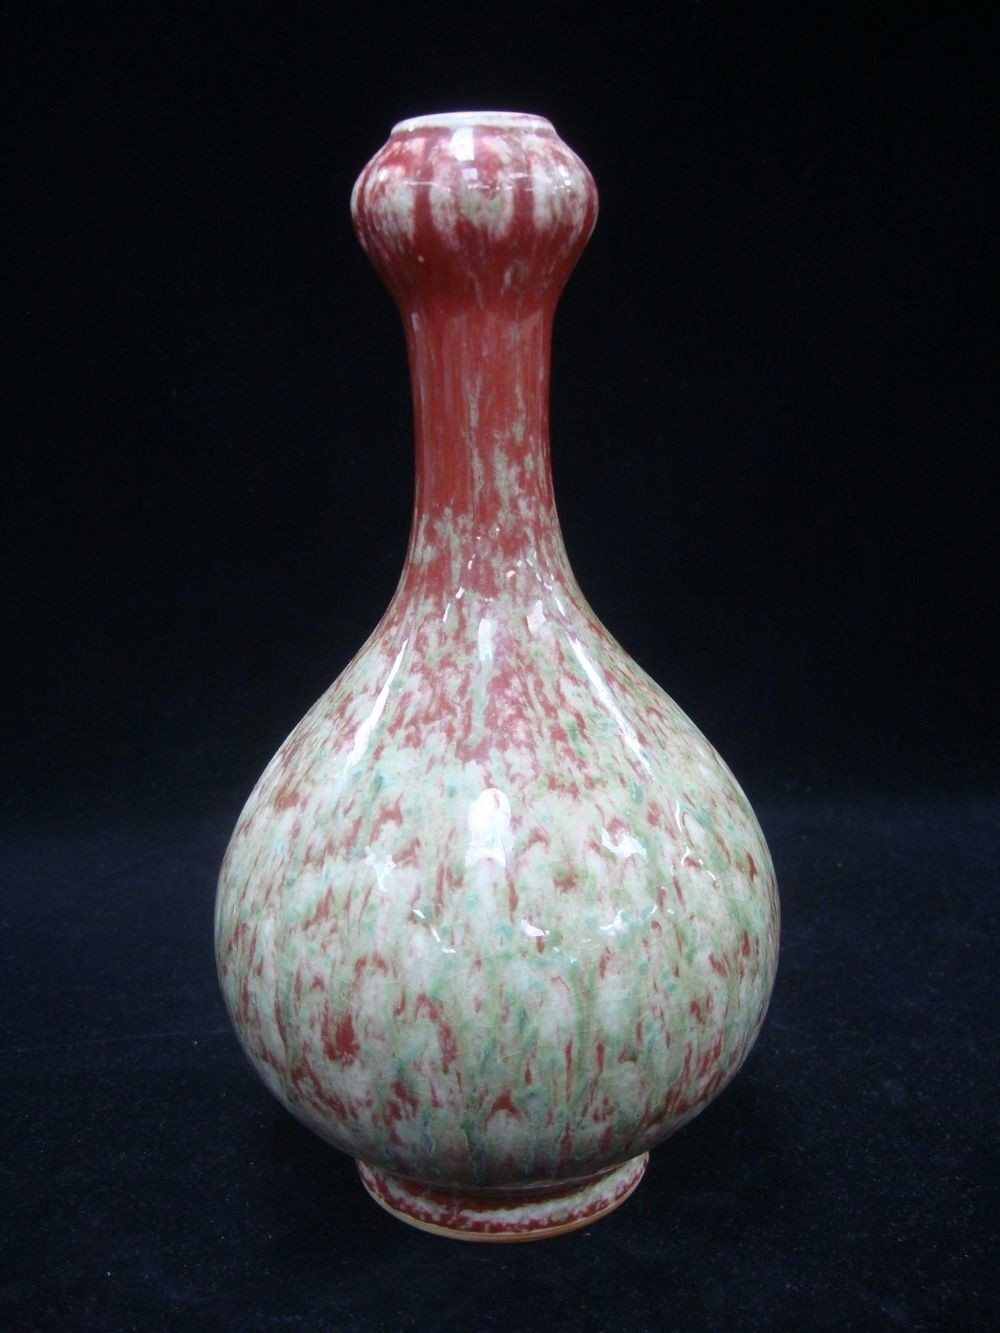 chinese cloisonne vase of vintage chinese green and red glazes porcelain bottle vase mark for 1 of 9free shipping